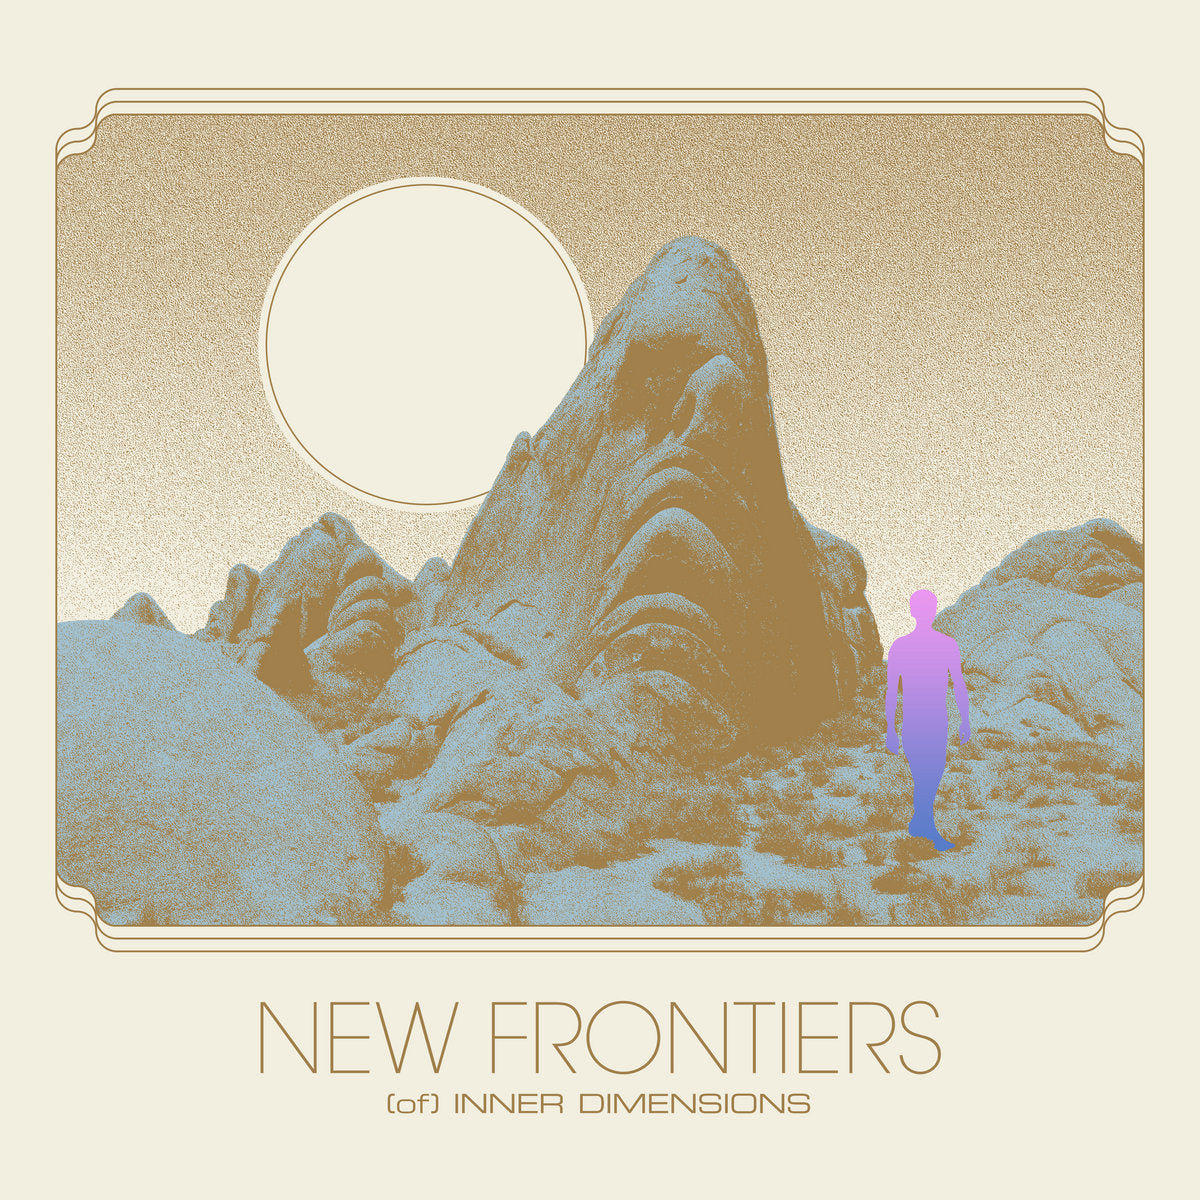 New Frontiers "(of) Inner Dimensions"